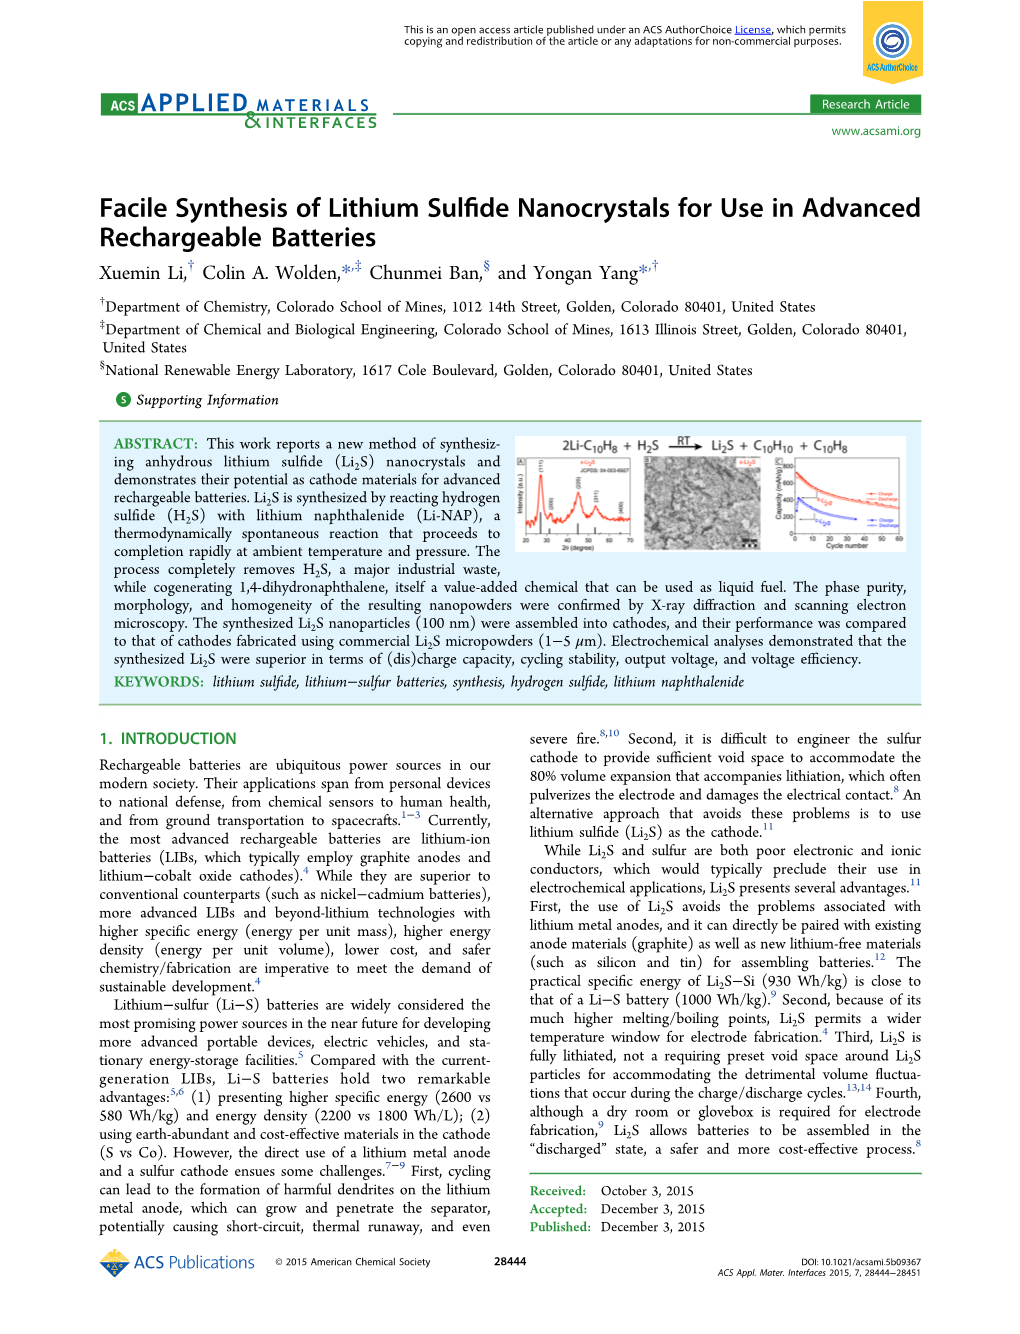 Facile Synthesis of Lithium Sulfide Nanocrystals for Use in Advanced